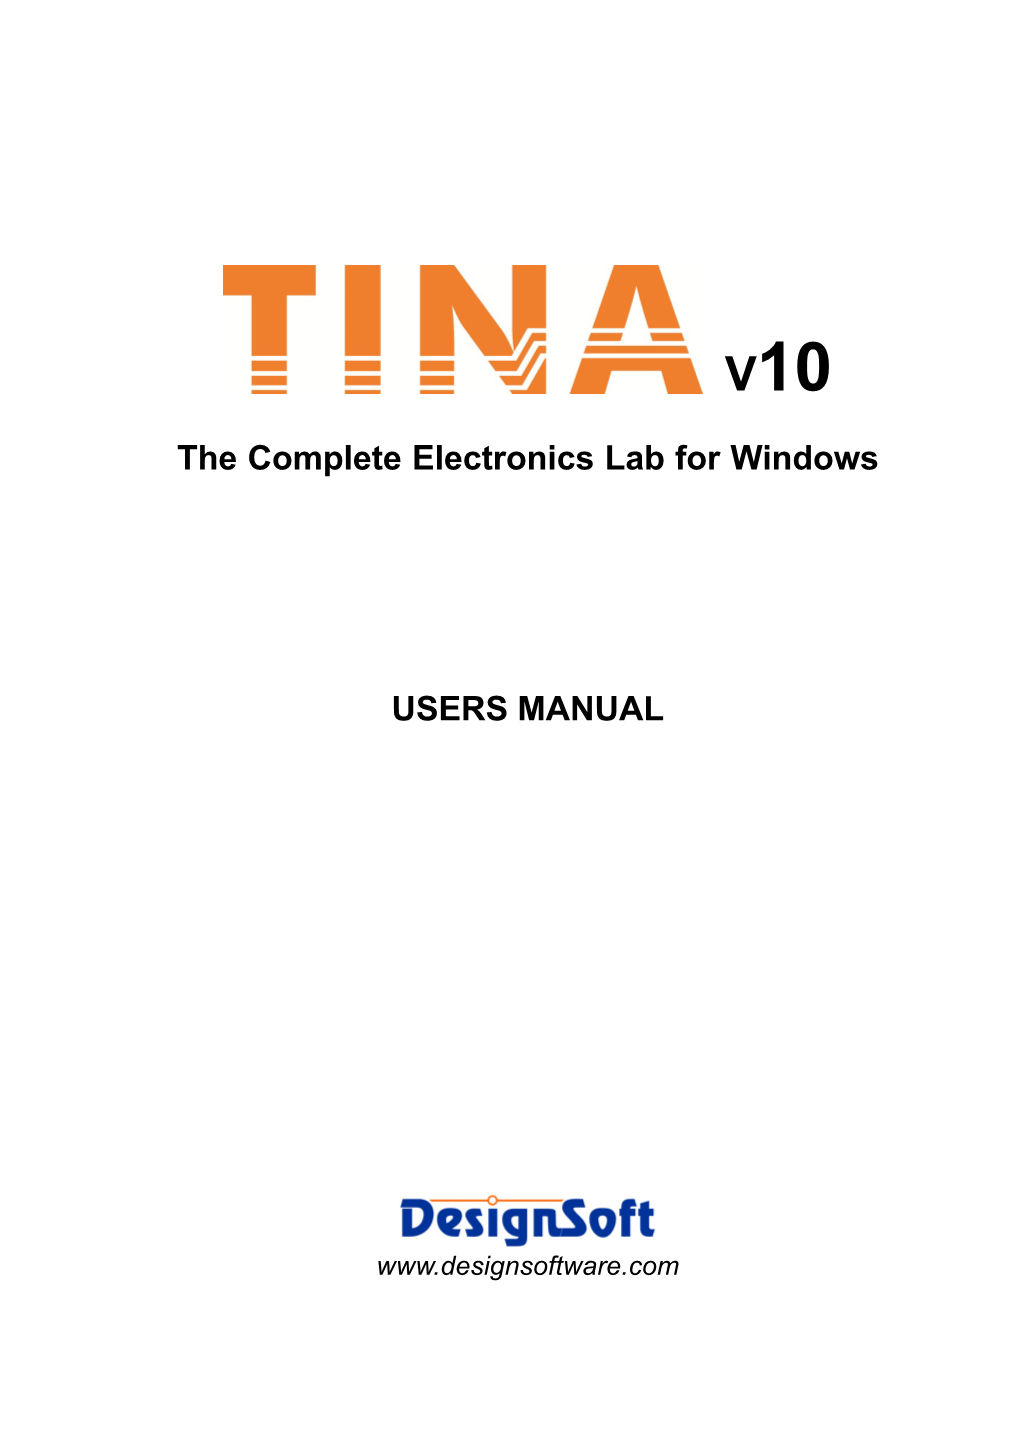 The Complete Electronics Lab for Windows USERS MANUAL